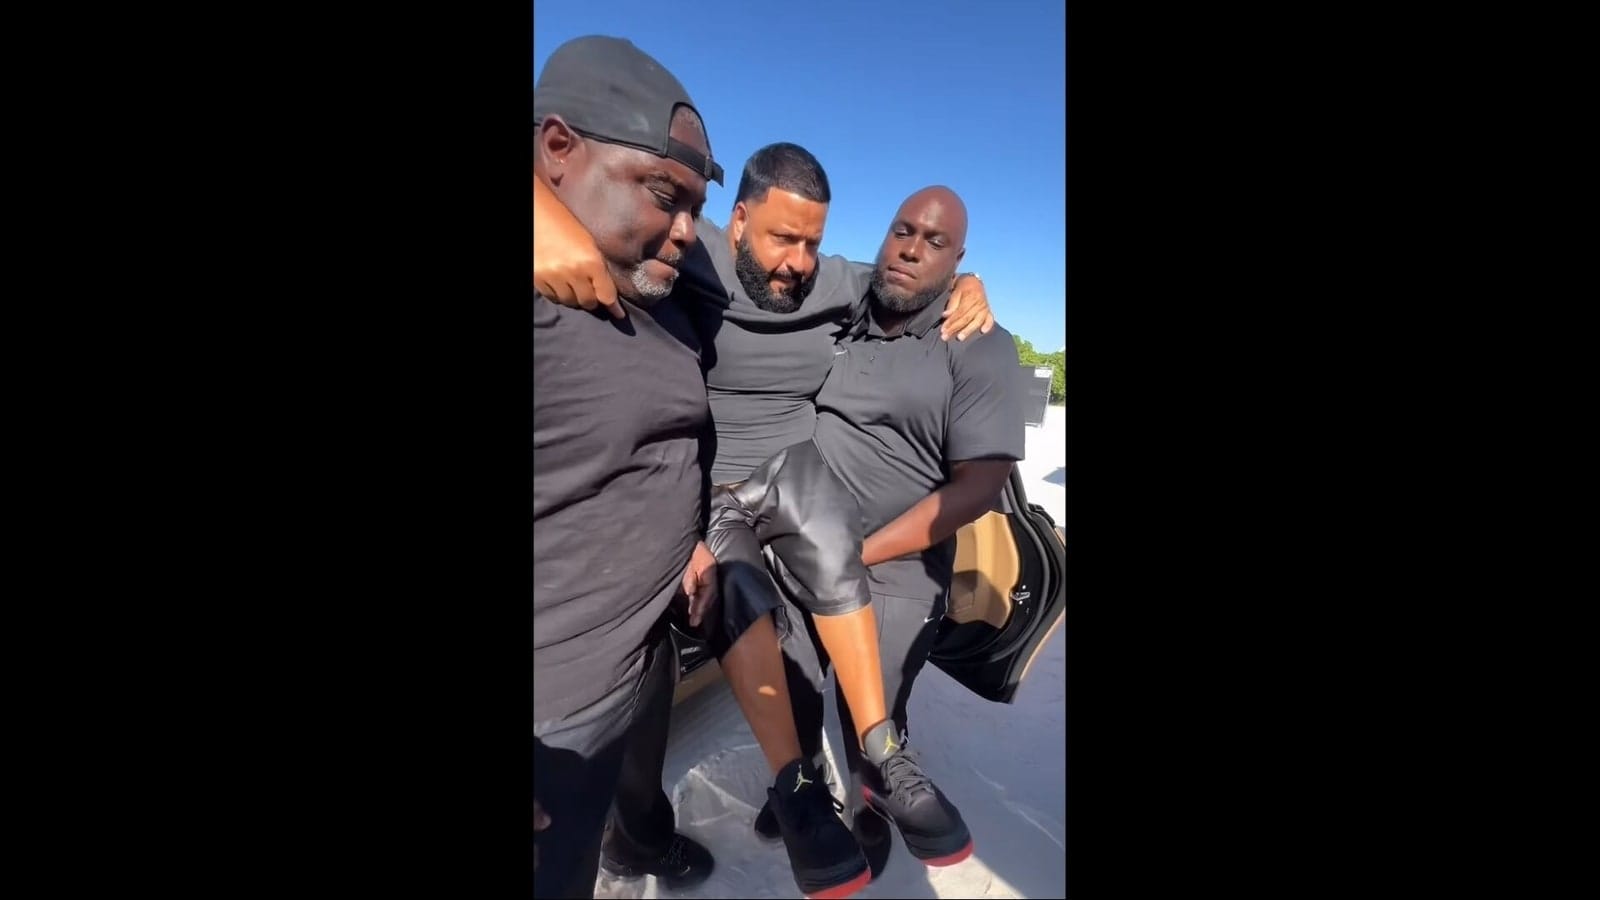 DJ Khaled makes security guards carry him to keep sneakers clean, faces backlash. Watch